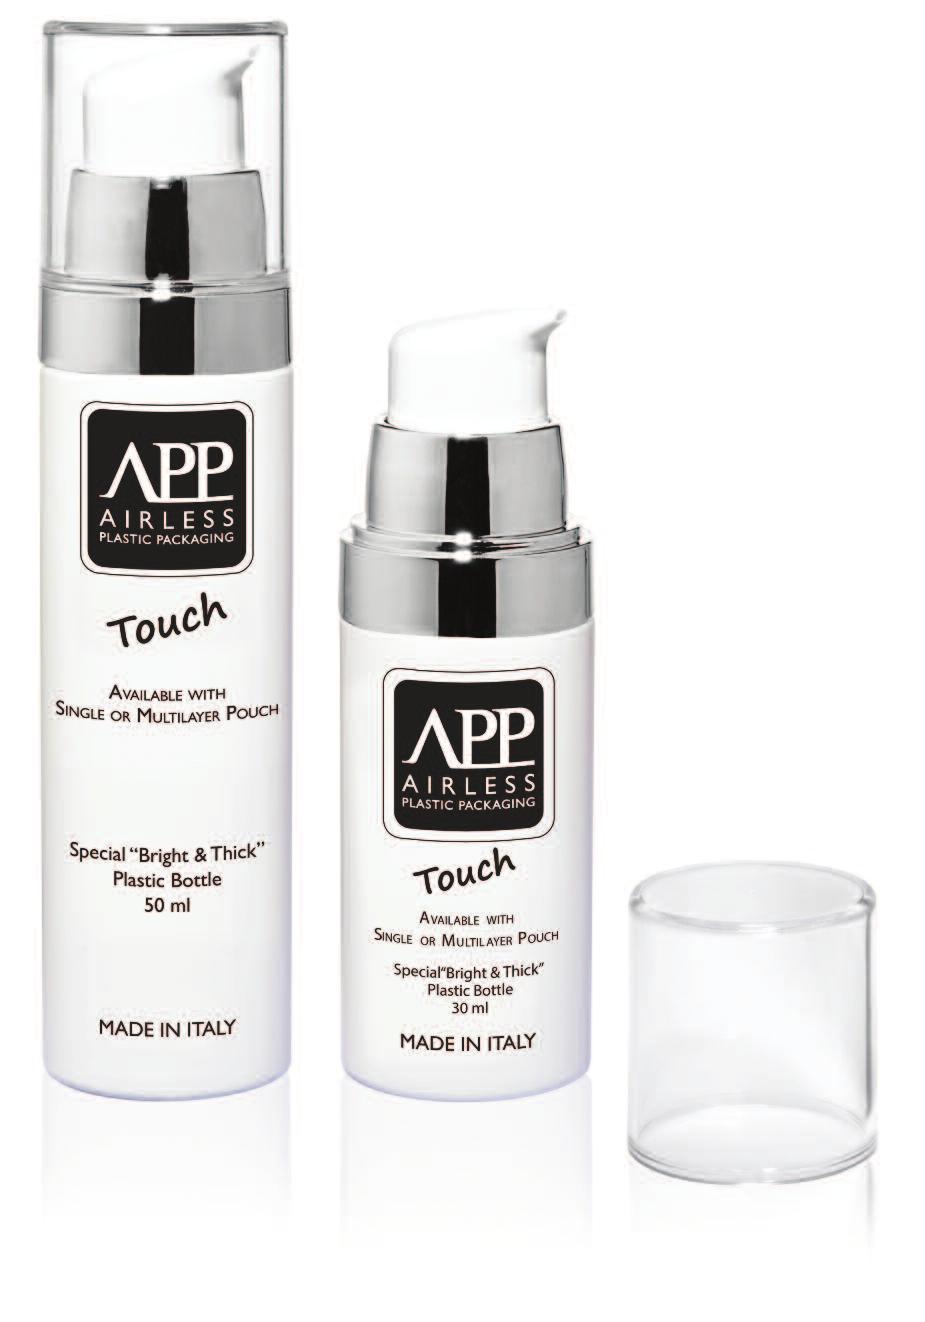 Airless Plastic Packaging APP 355 TOUCH Sizes: 30 ml - 50 ml Materials: Bottle: PE Soft Touch Pouch: PE special compound Single or Multilayer PUMP SMART AIRLESS AA355 Neck: Special